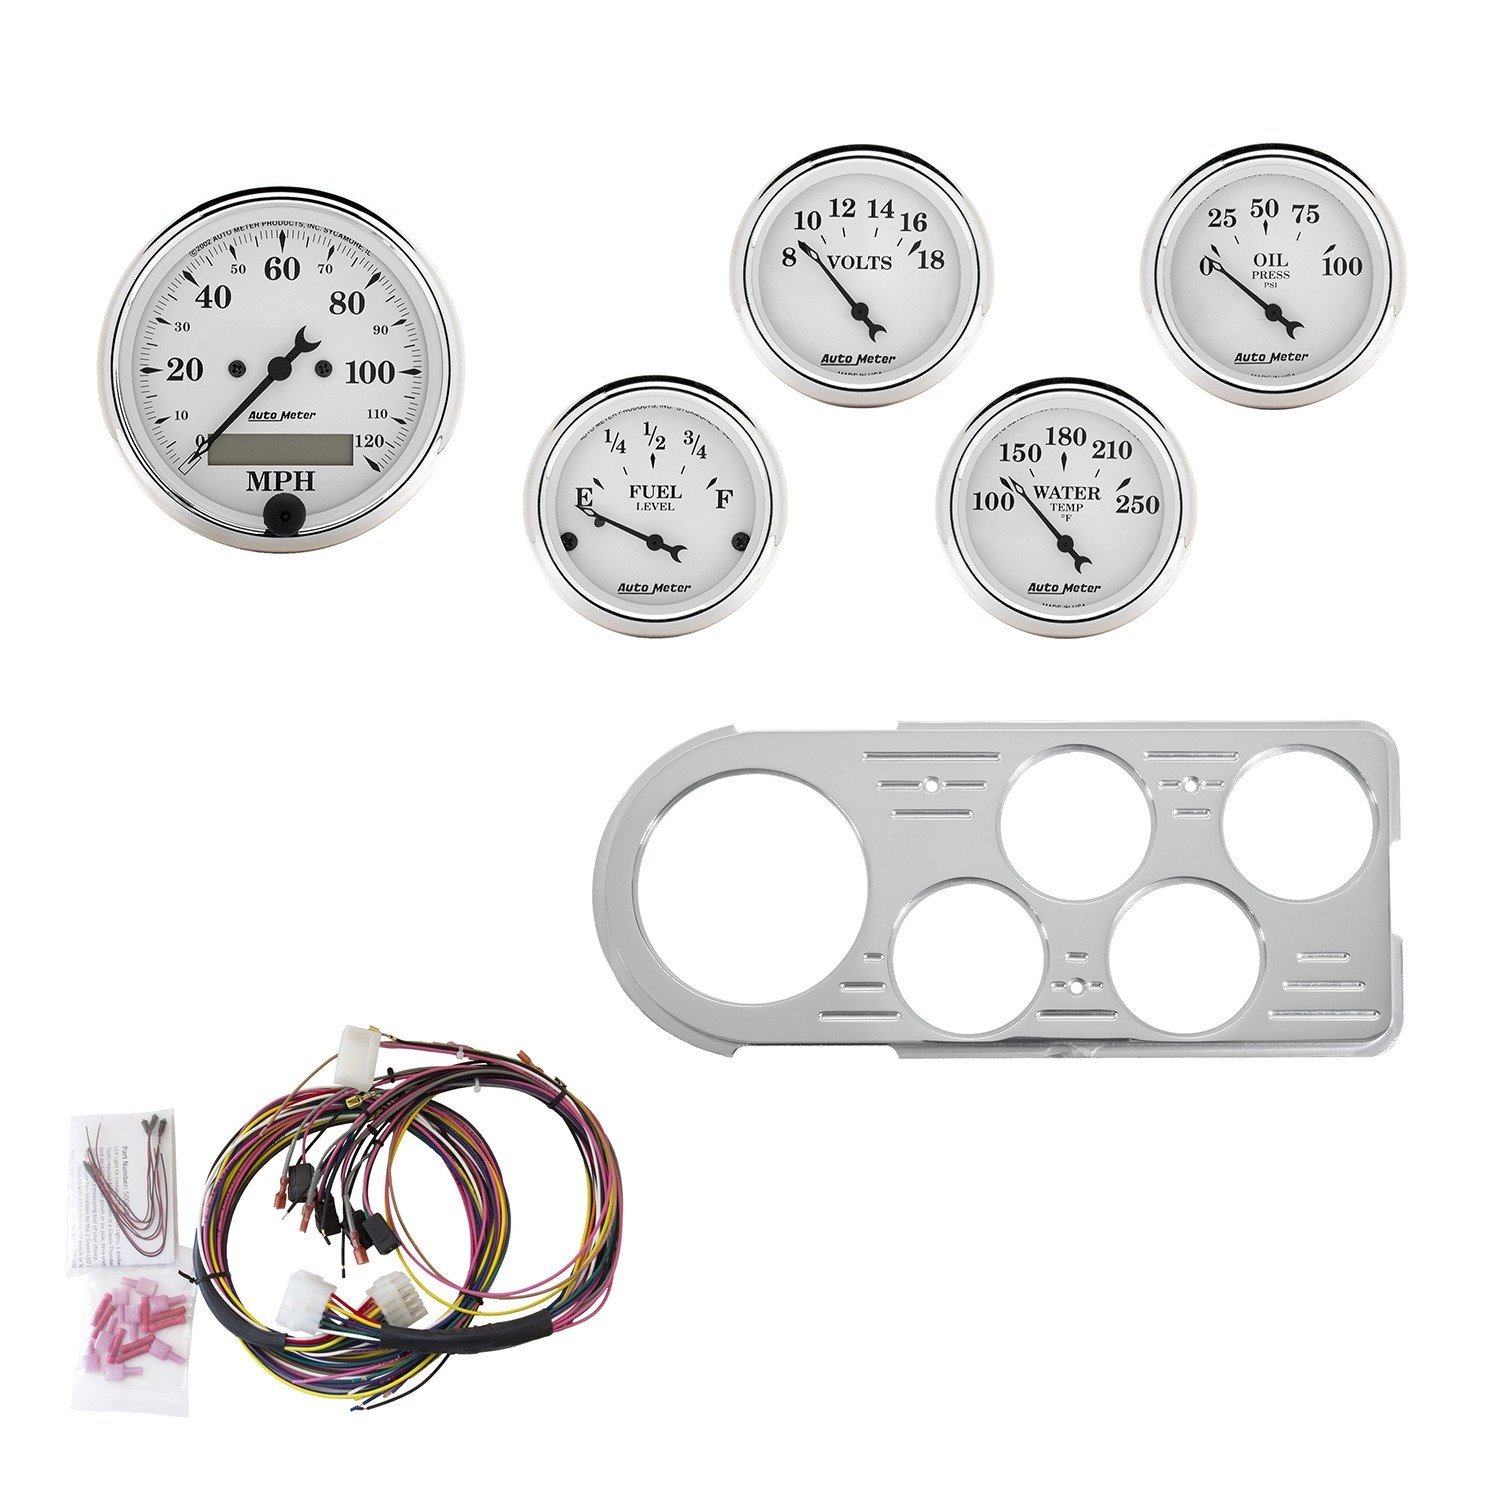 5-Gauge Direct-Fit Dash Kit 1948-1950 Ford Truck - Old Tyme White Series - Polished Panel